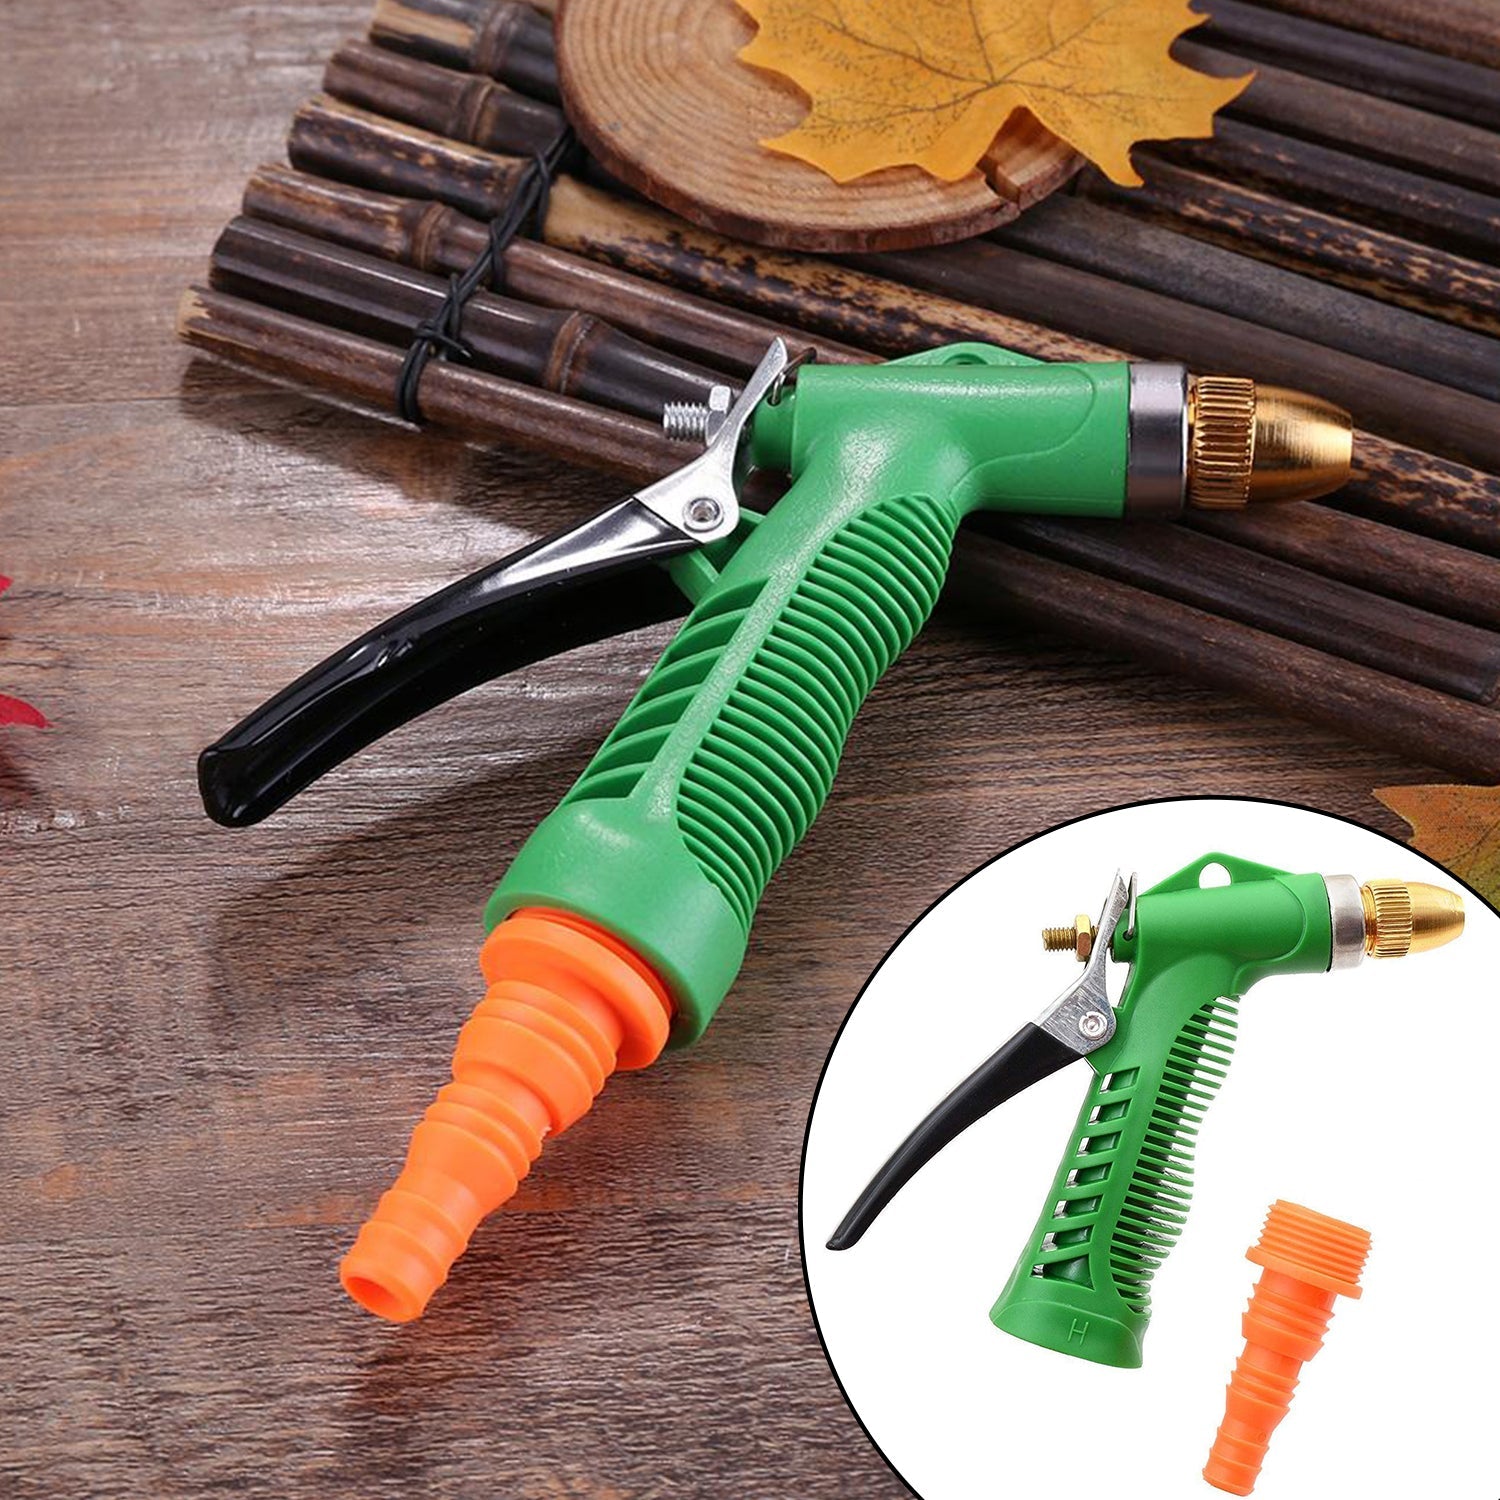 0590L Spray Gun For Watering And Sprinkling Purposes Over Plants And Trees In Parks And Types Of Garden Places Etc. DeoDap